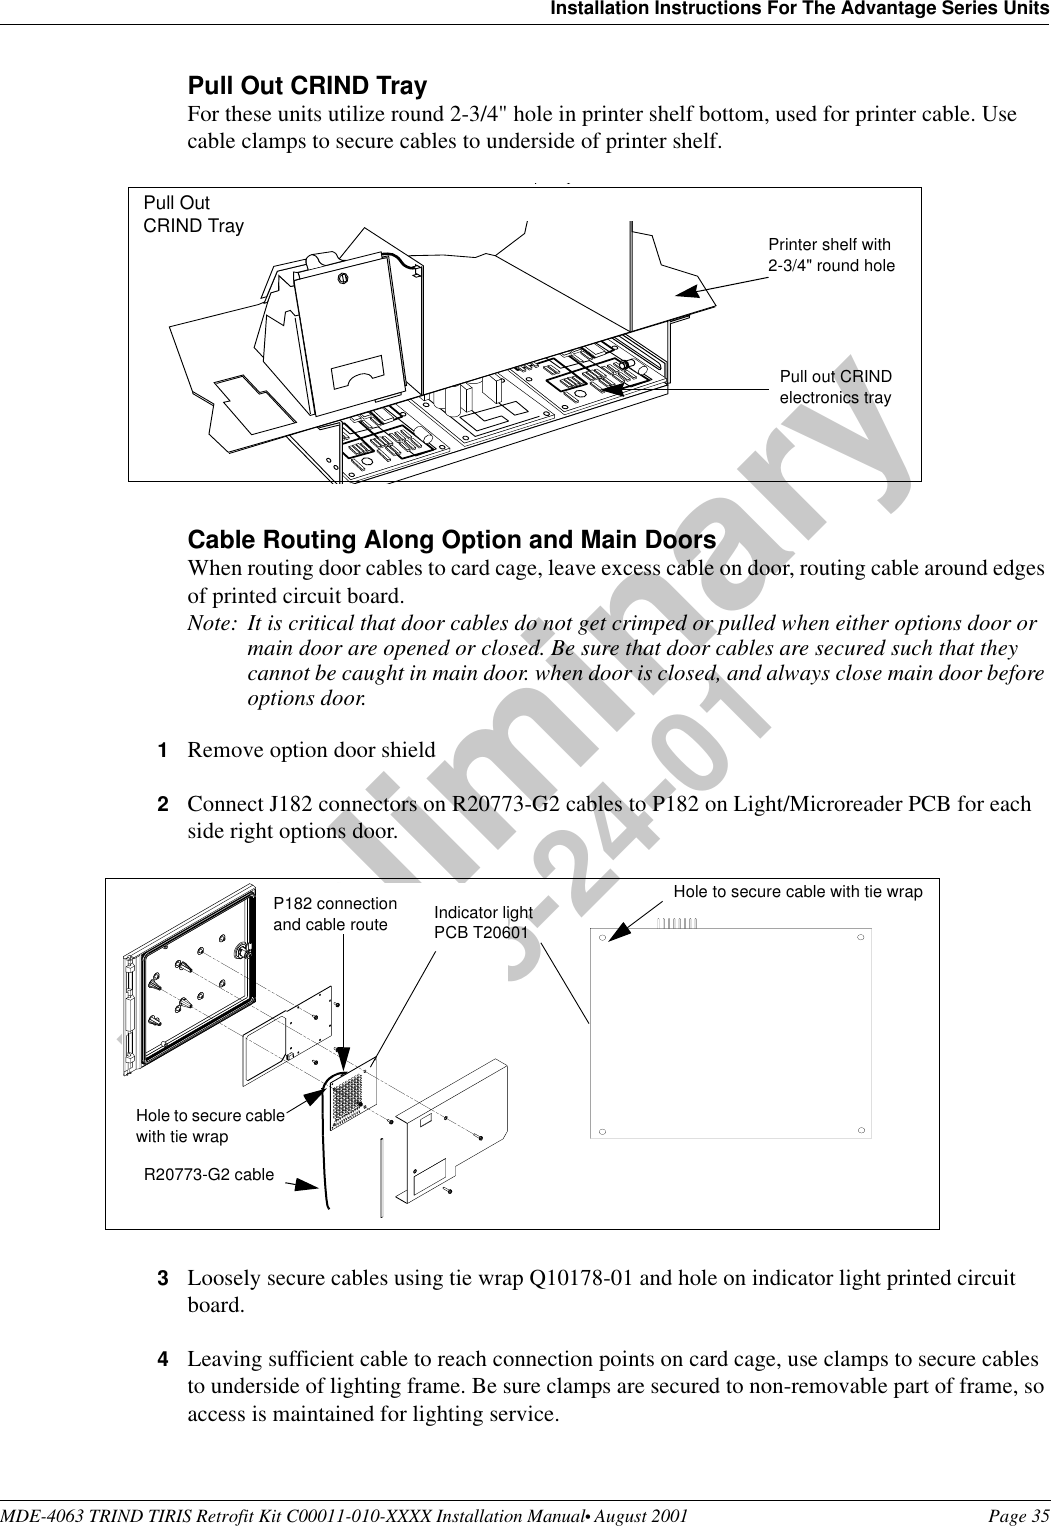 MDE-4063 TRIND TIRIS Retrofit Kit C00011-010-XXXX Installation Manual• August 2001 Page 35Installation Instructions For The Advantage Series UnitsPreliminary08-24-01Pull Out CRIND TrayFor these units utilize round 2-3/4&quot; hole in printer shelf bottom, used for printer cable. Use cable clamps to secure cables to underside of printer shelf.Cable Routing Along Option and Main DoorsWhen routing door cables to card cage, leave excess cable on door, routing cable around edges of printed circuit board.Note: It is critical that door cables do not get crimped or pulled when either options door or main door are opened or closed. Be sure that door cables are secured such that they cannot be caught in main door. when door is closed, and always close main door before options door.1Remove option door shield2Connect J182 connectors on R20773-G2 cables to P182 on Light/Microreader PCB for each side right options door.3Loosely secure cables using tie wrap Q10178-01 and hole on indicator light printed circuit board.4Leaving sufficient cable to reach connection points on card cage, use clamps to secure cables to underside of lighting frame. Be sure clamps are secured to non-removable part of frame, so access is maintained for lighting service. Printer shelf with 2-3/4&quot; round holePull out CRIND electronics trayPull Out CRIND TrayIndicator light PCB T20601P182 connection and cable routeHole to secure cable with tie wrapHole to secure cable with tie wrapR20773-G2 cable